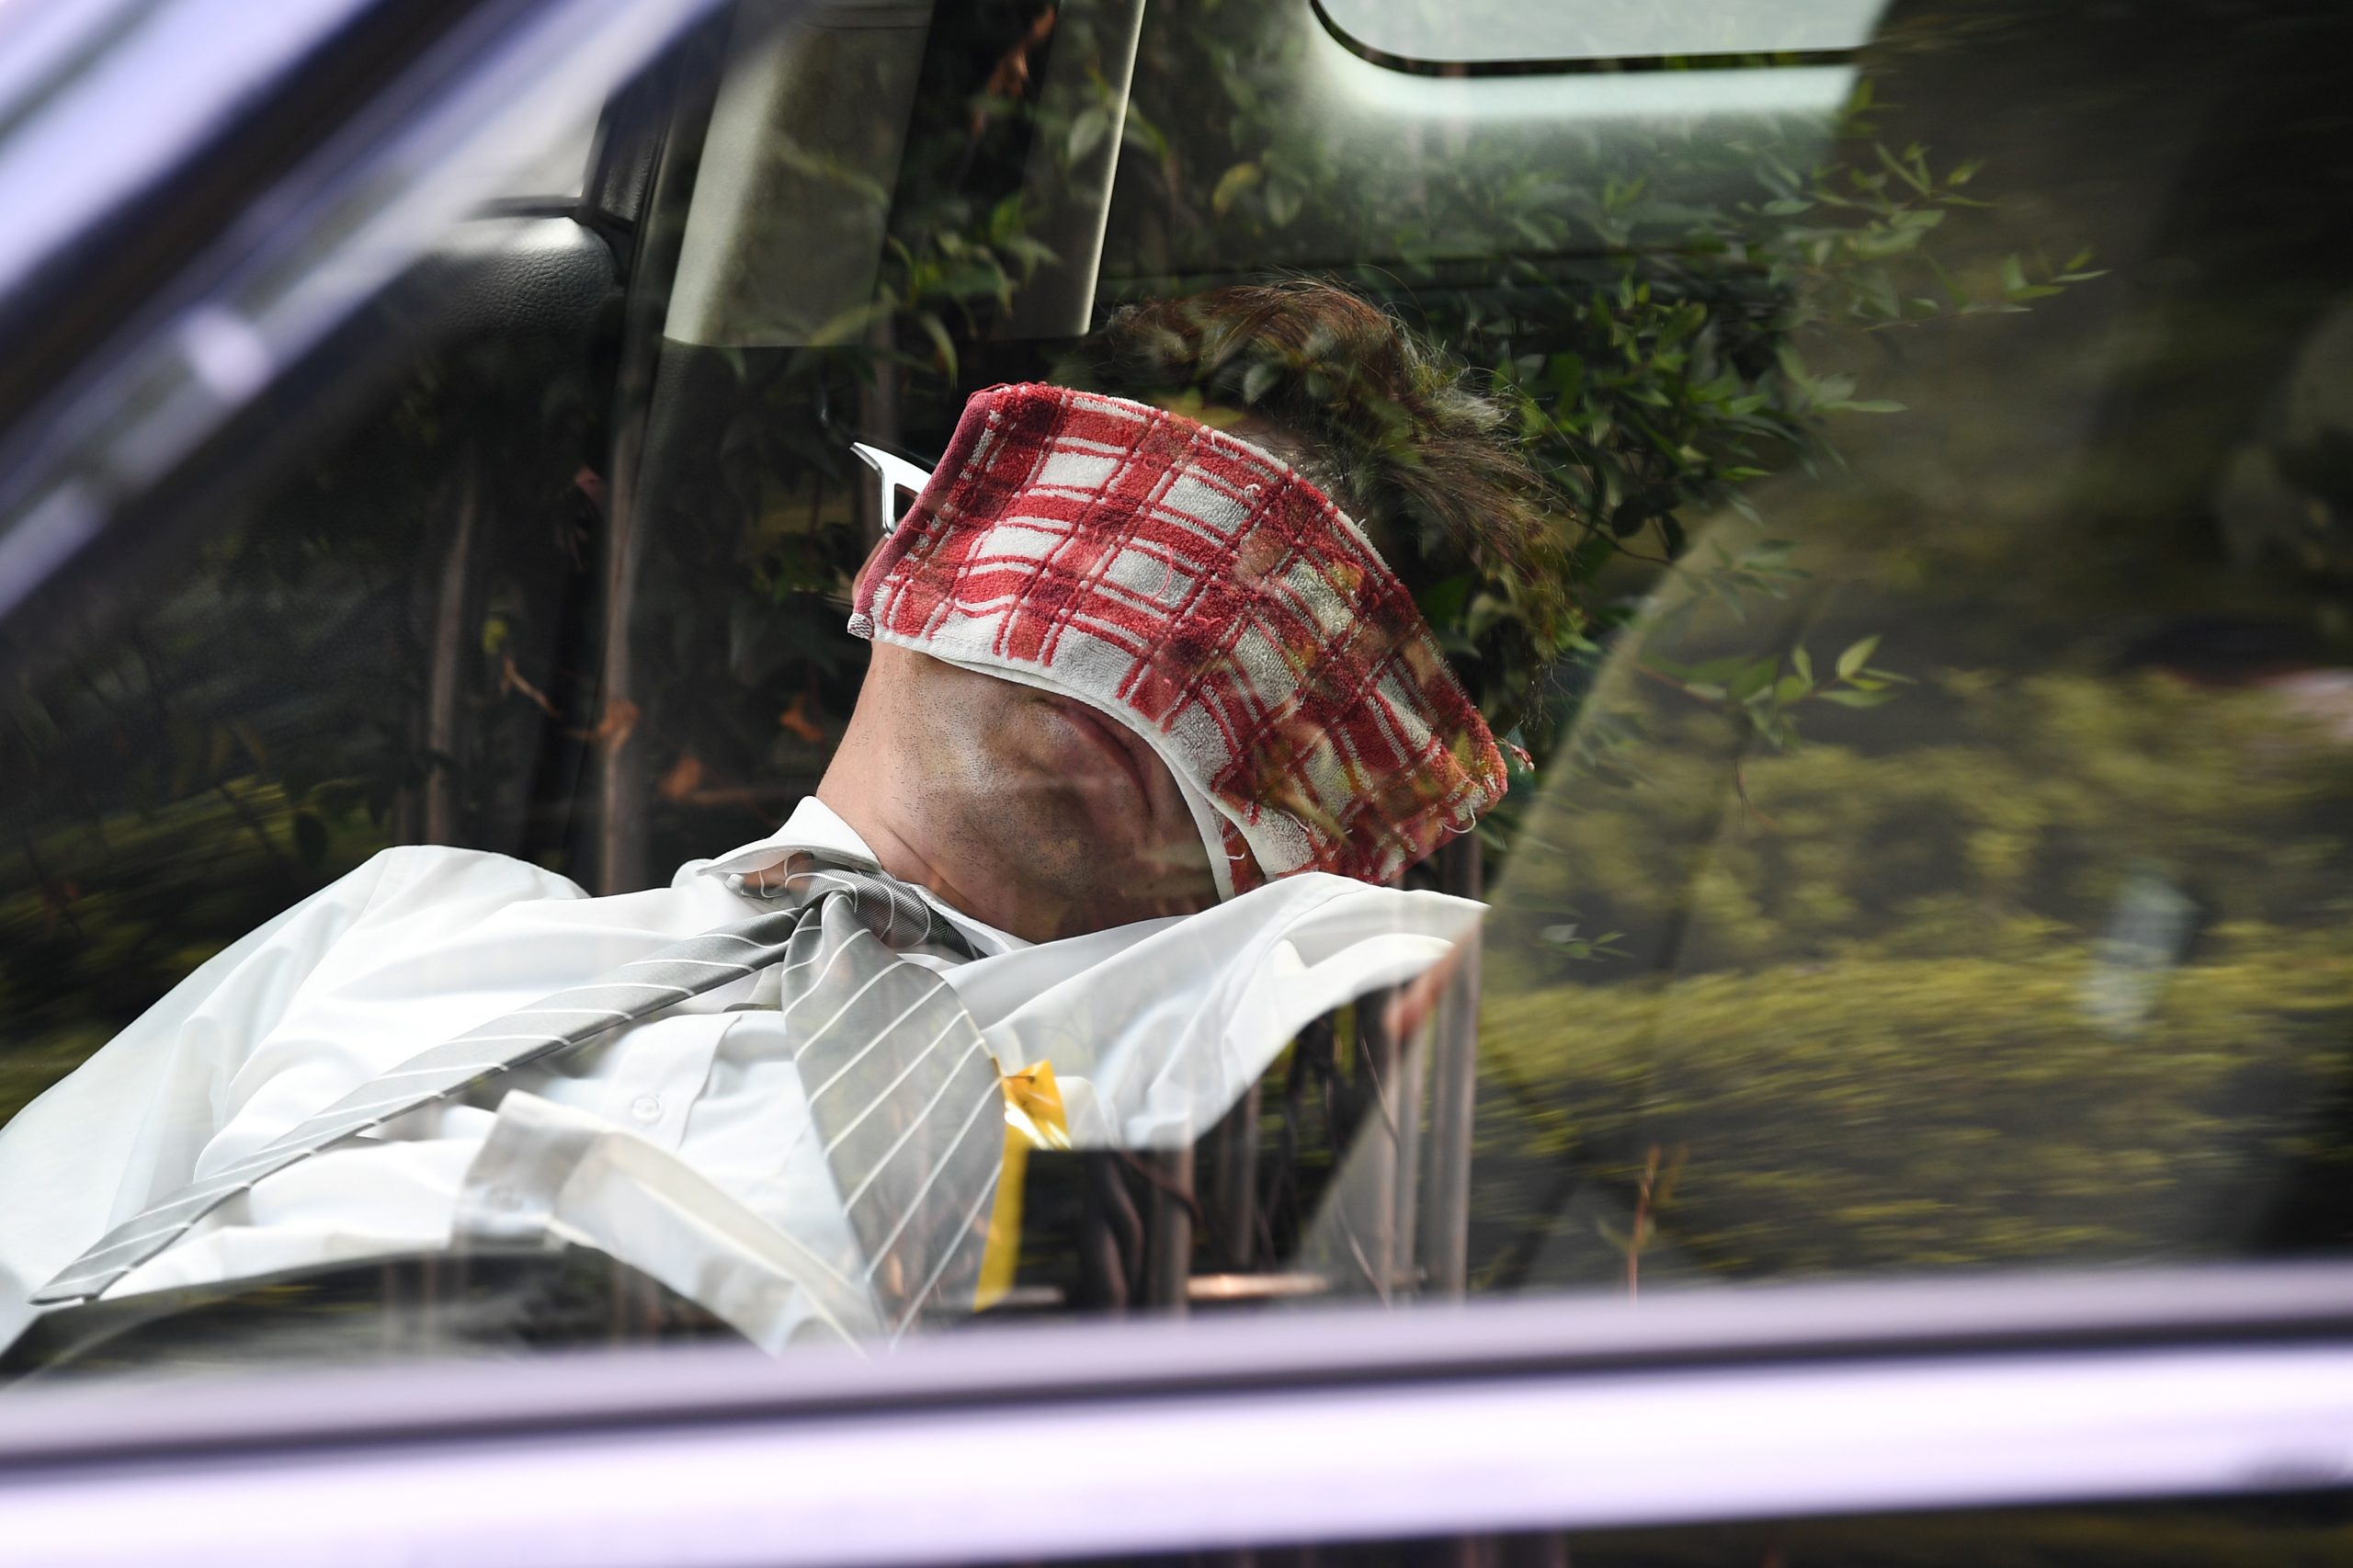 Road safety study: after-lunch nap saves lives